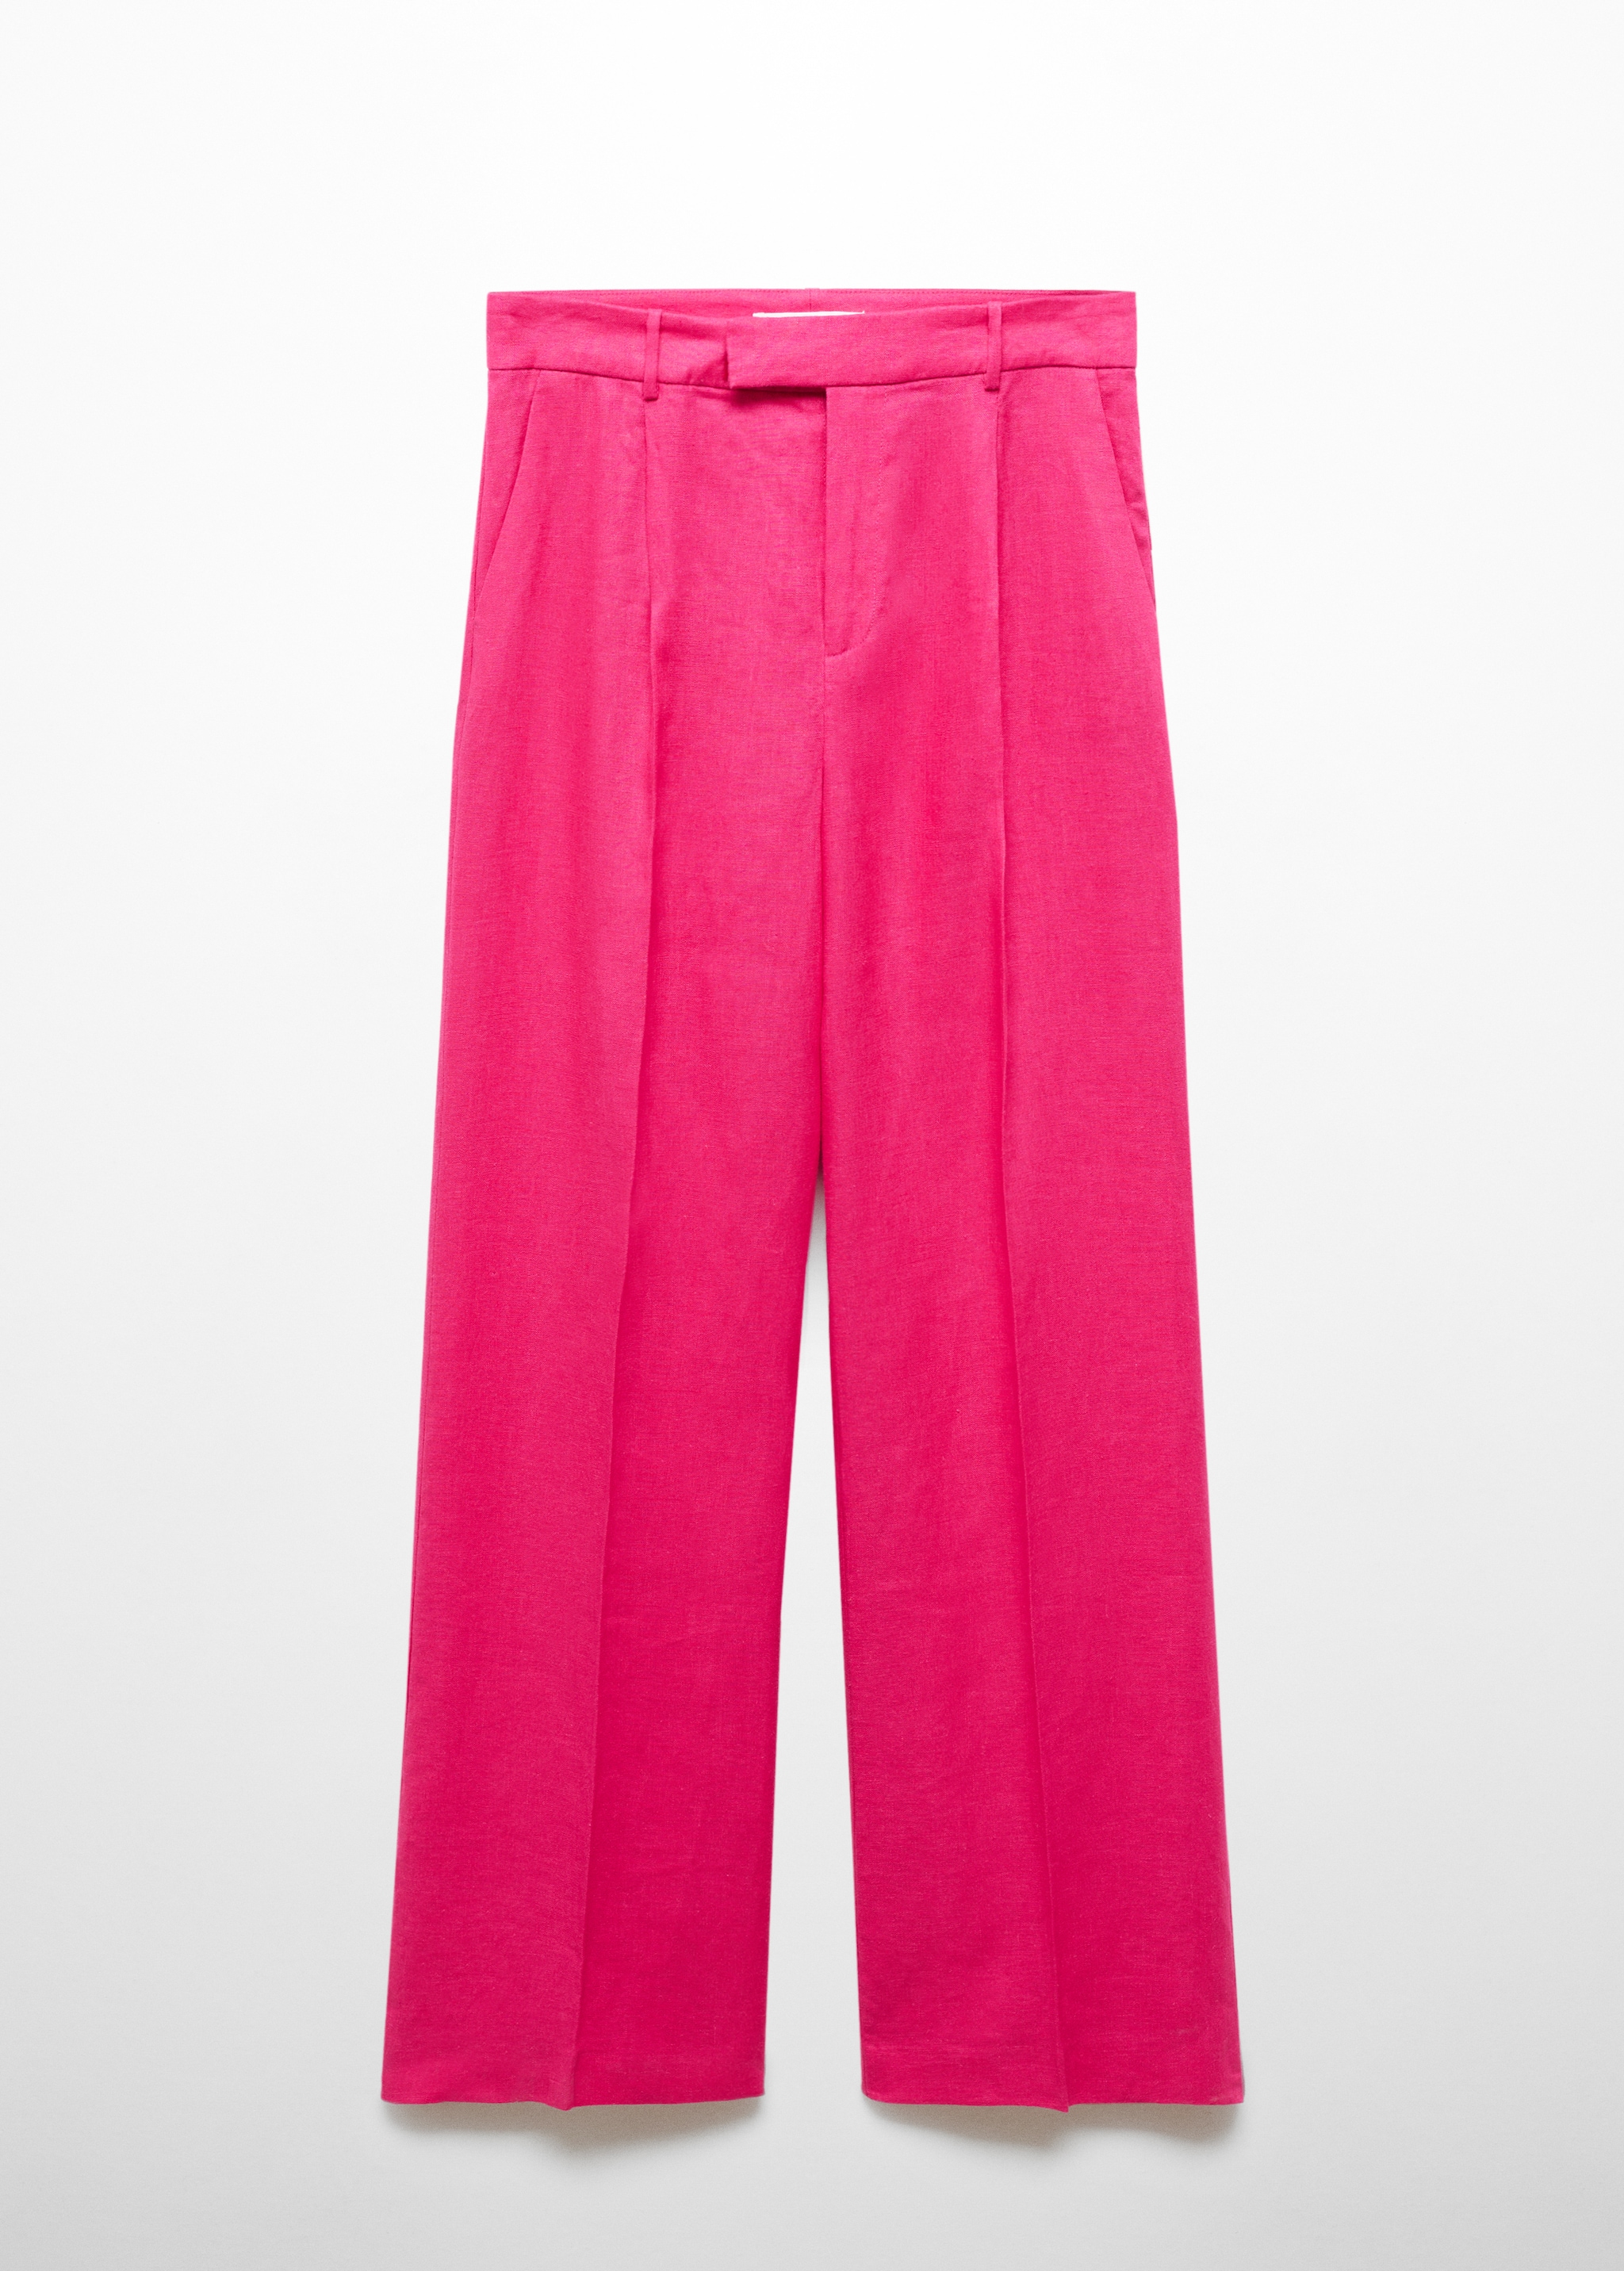 Pleated linen pants - Article without model